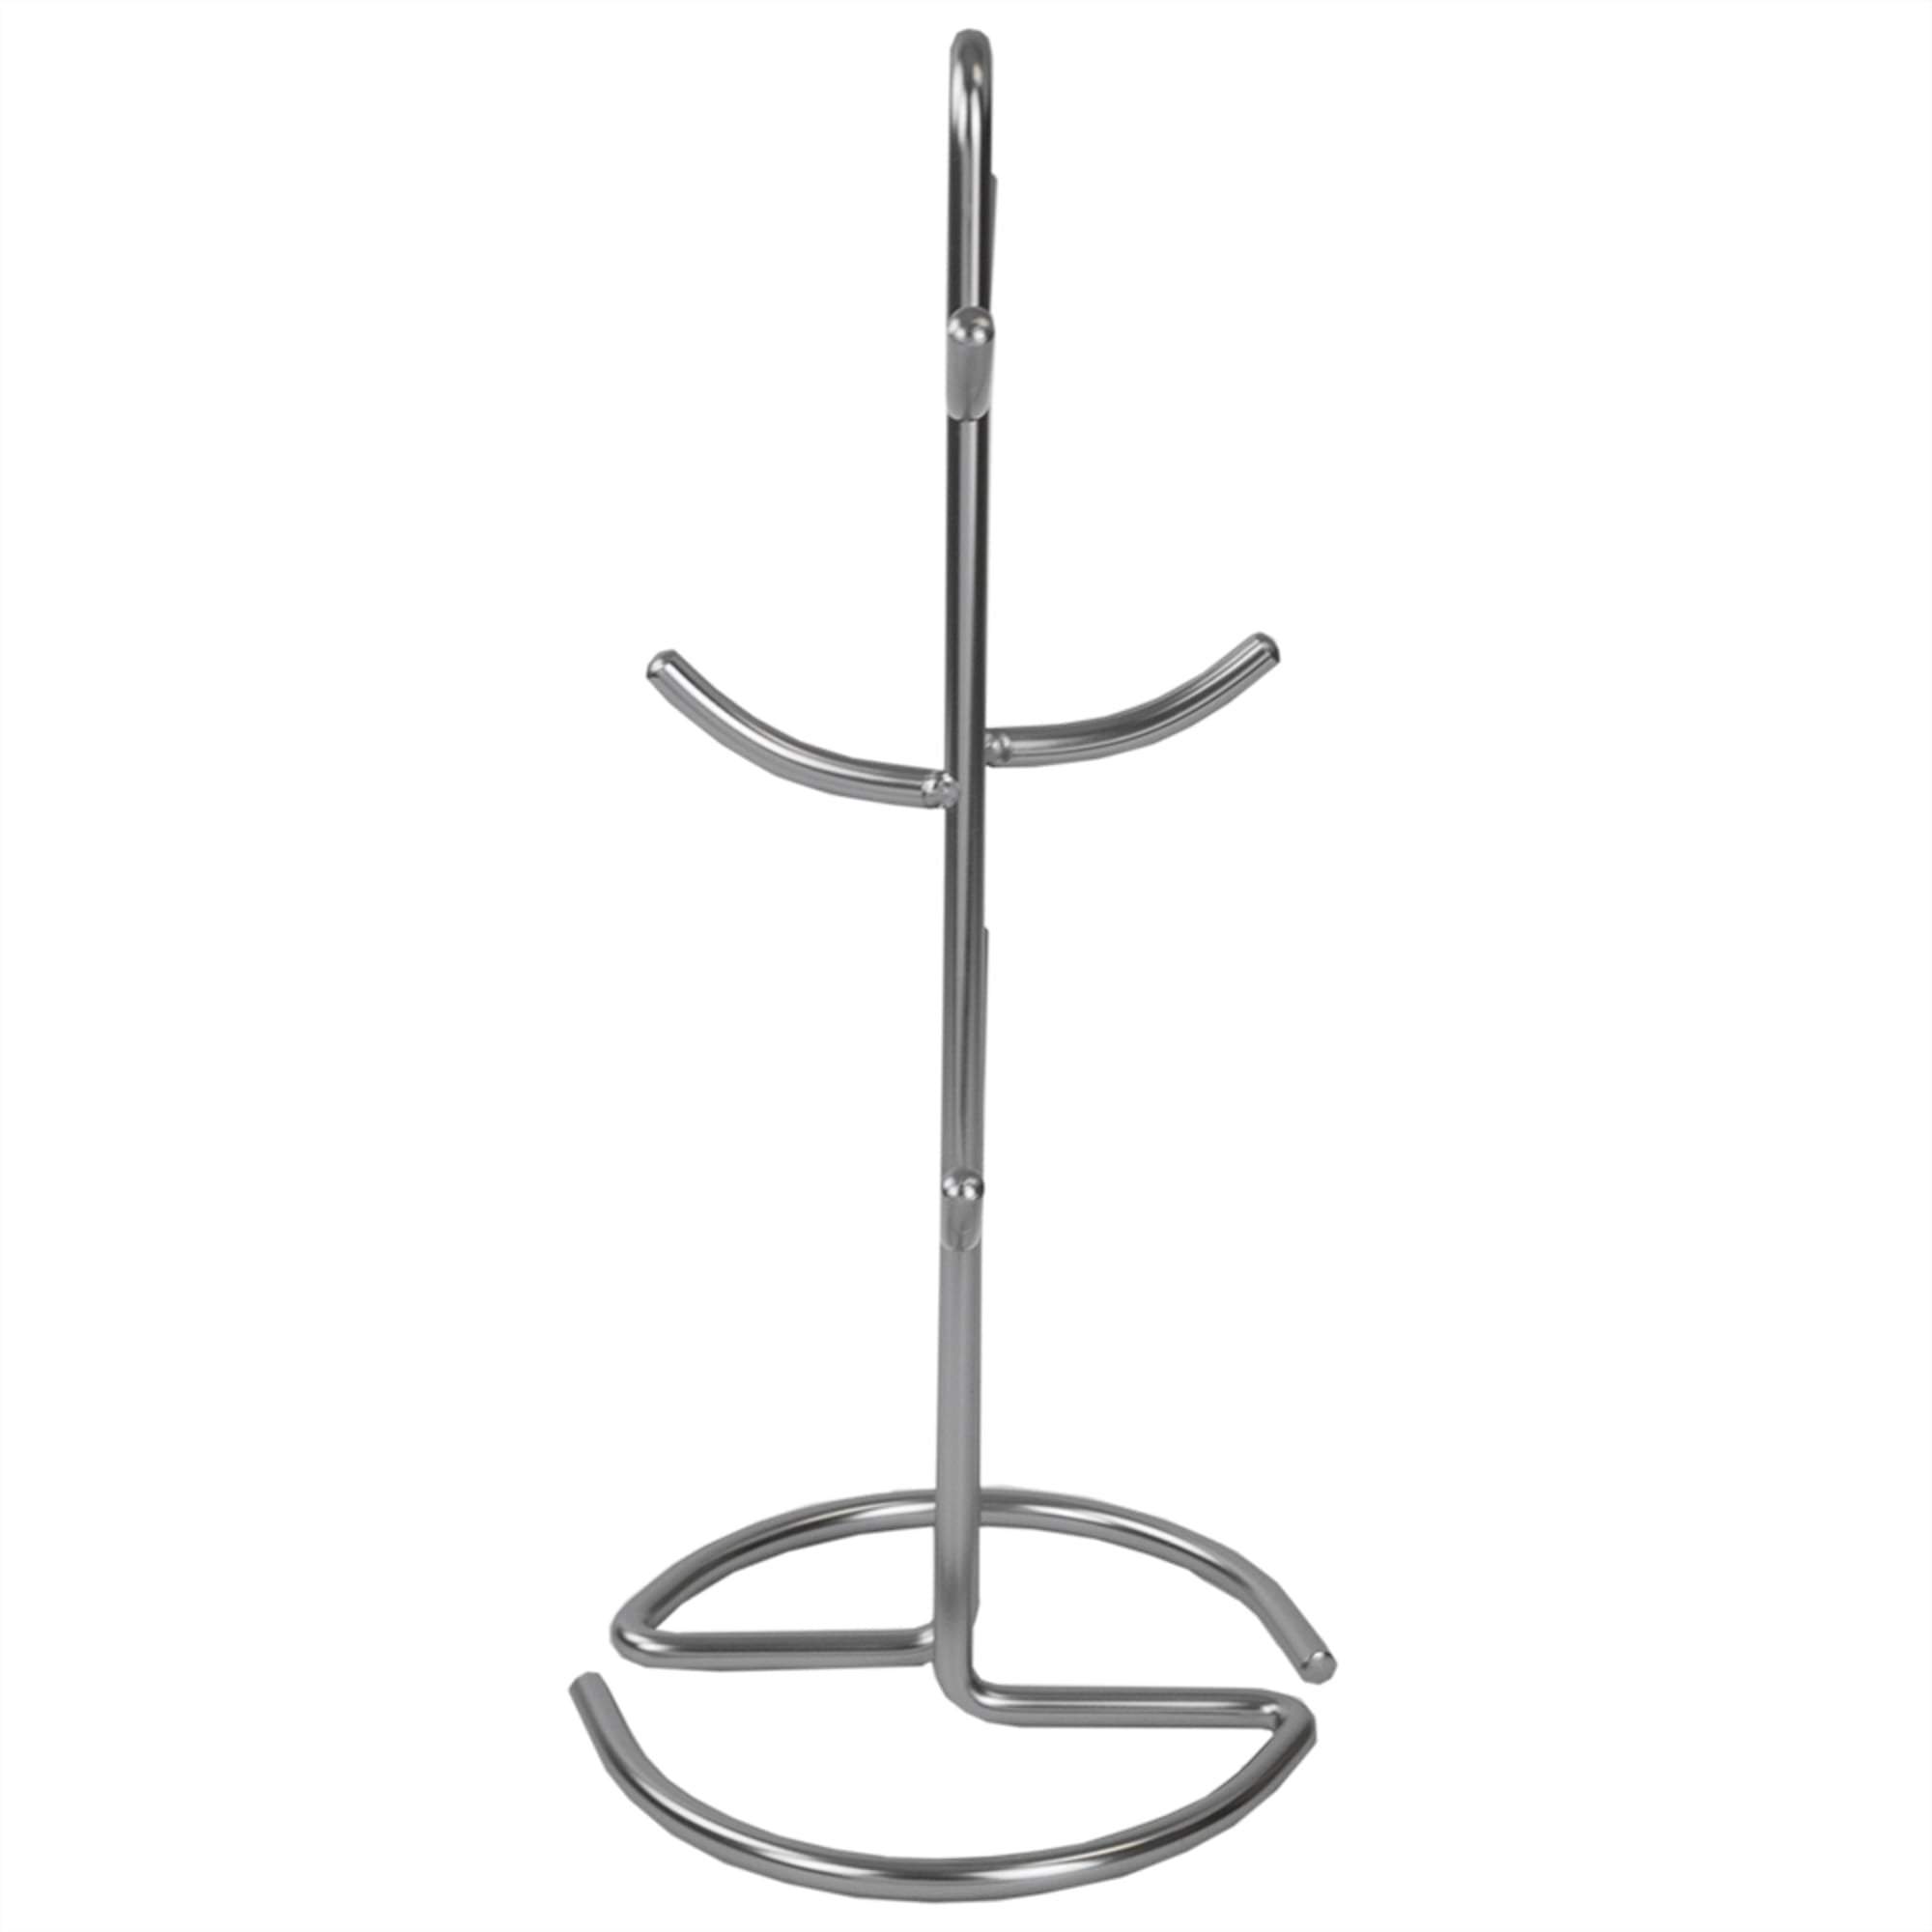 Home Basics Simplicity Collection 6 Hook Steel Mug Tree, Satin Nickel $10.00 EACH, CASE PACK OF 12